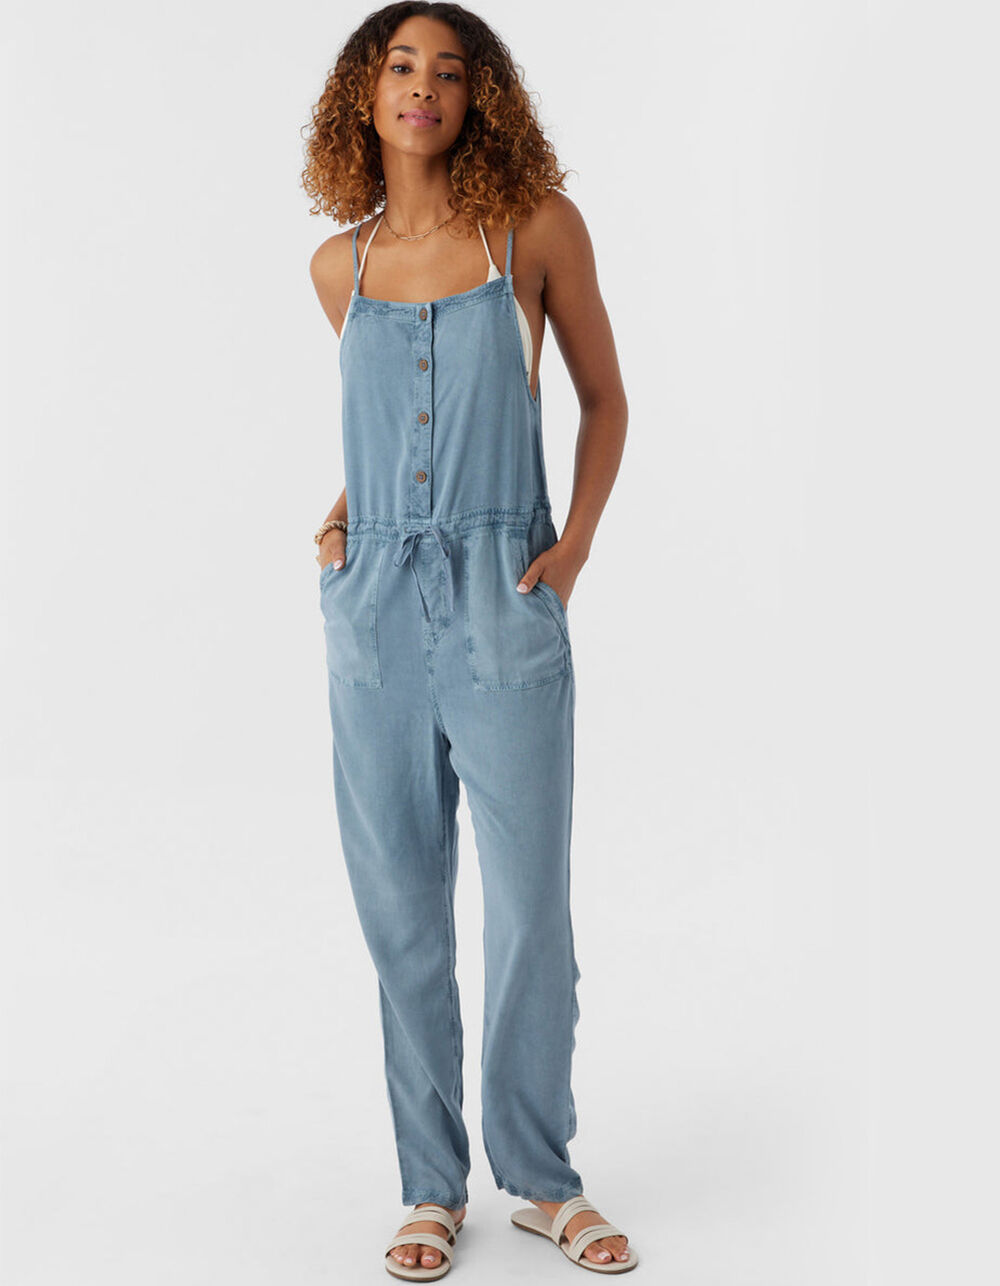 Quiksilver Womens Lounge About Sleeveless Jumpsuit